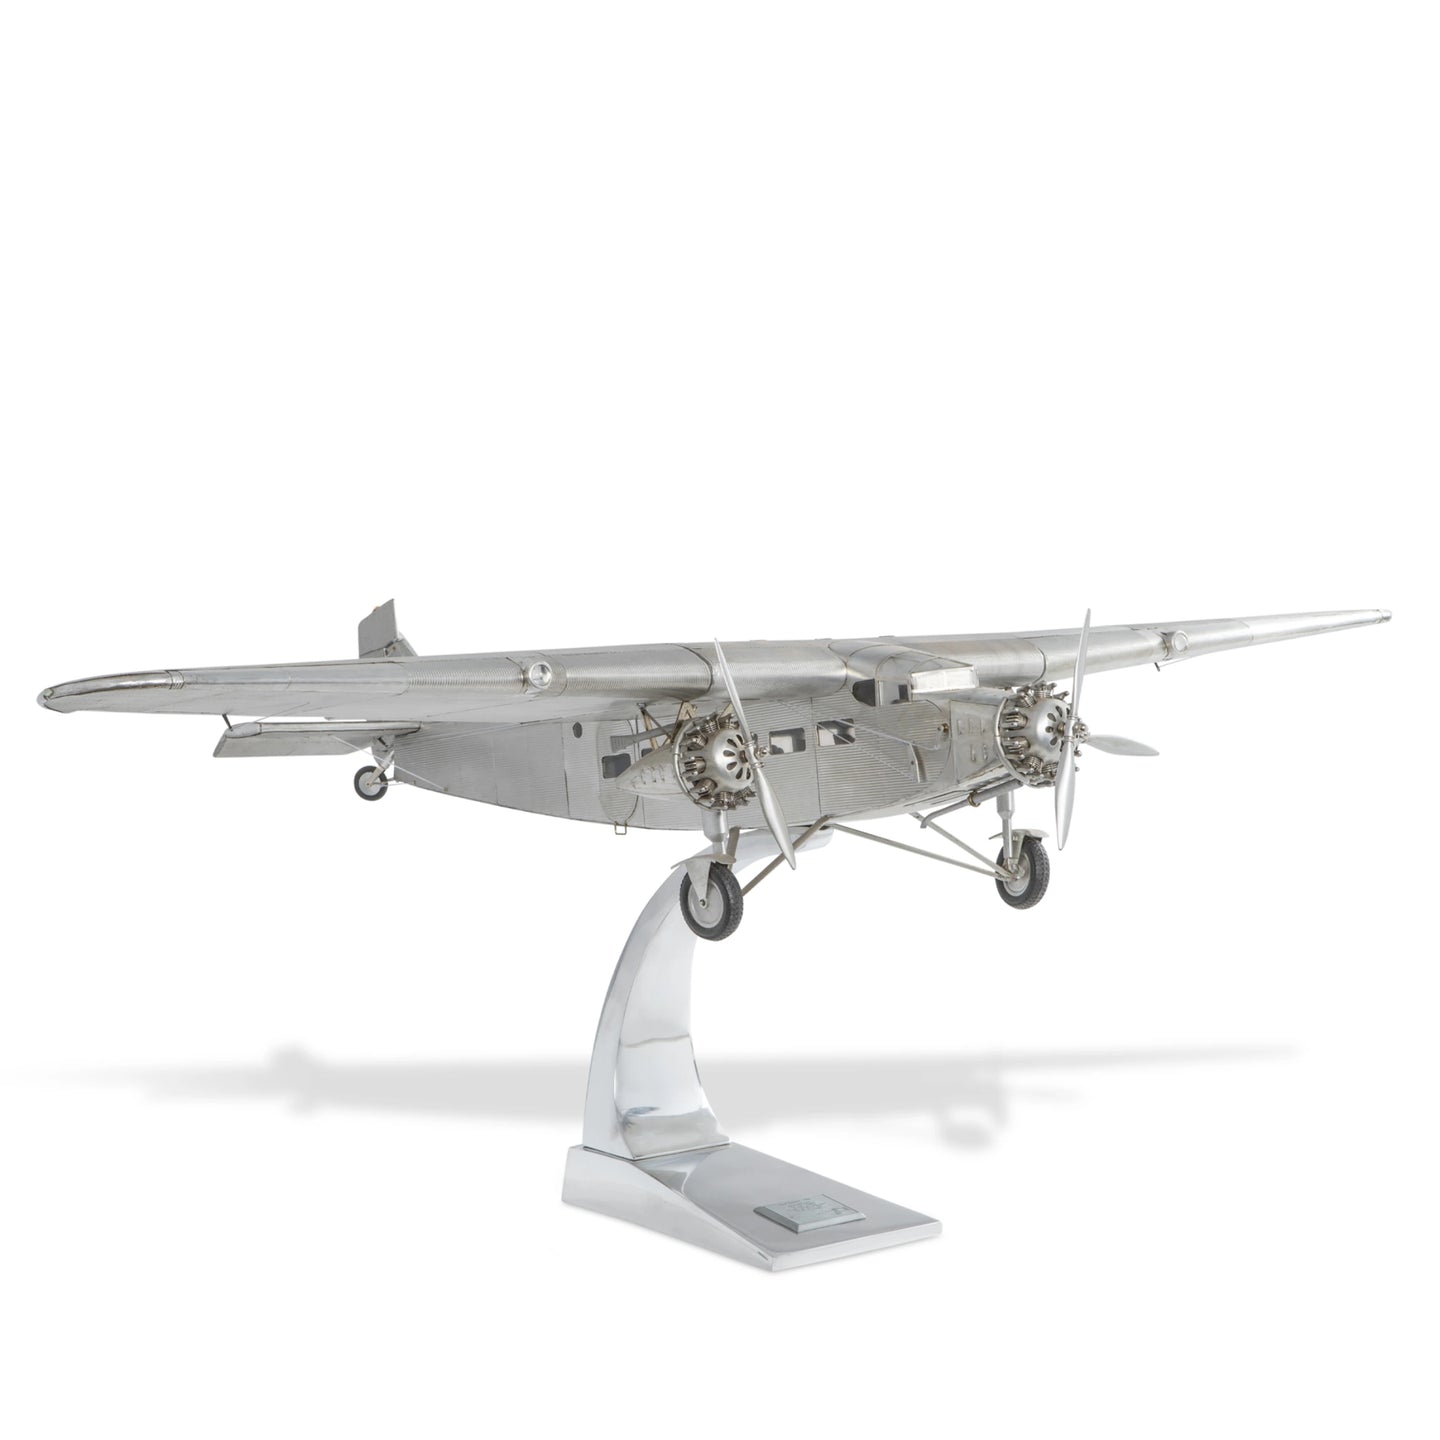 Authentic Models Ford Trimotor - AP452